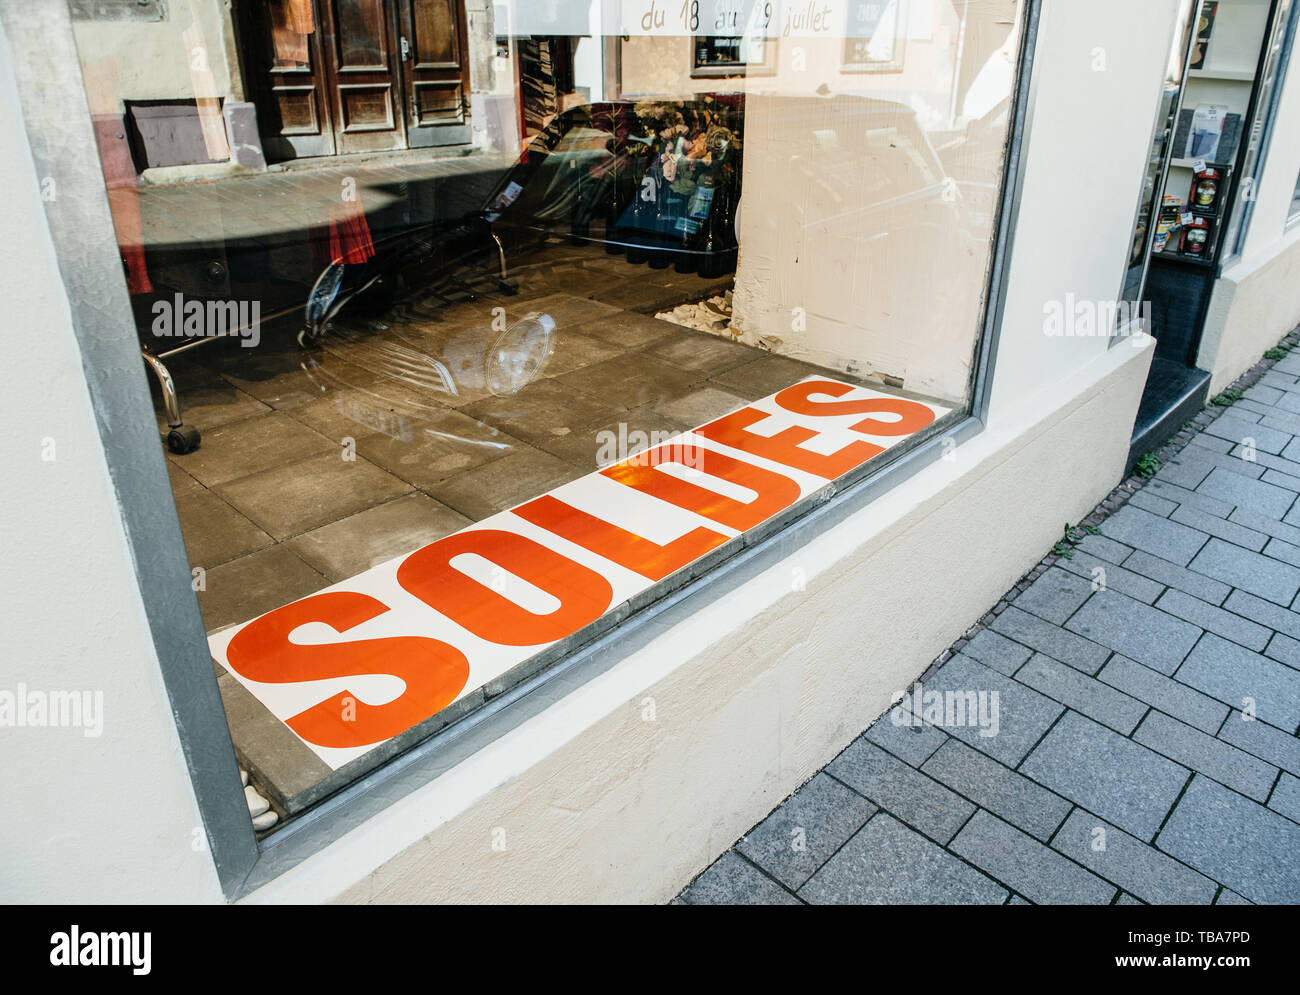 Strasbourg, France - Jul 22, 2017: View of Soldes Sales sing in in the  fashion store glass showcase with BMW mini car parked in the street Stock  Photo - Alamy